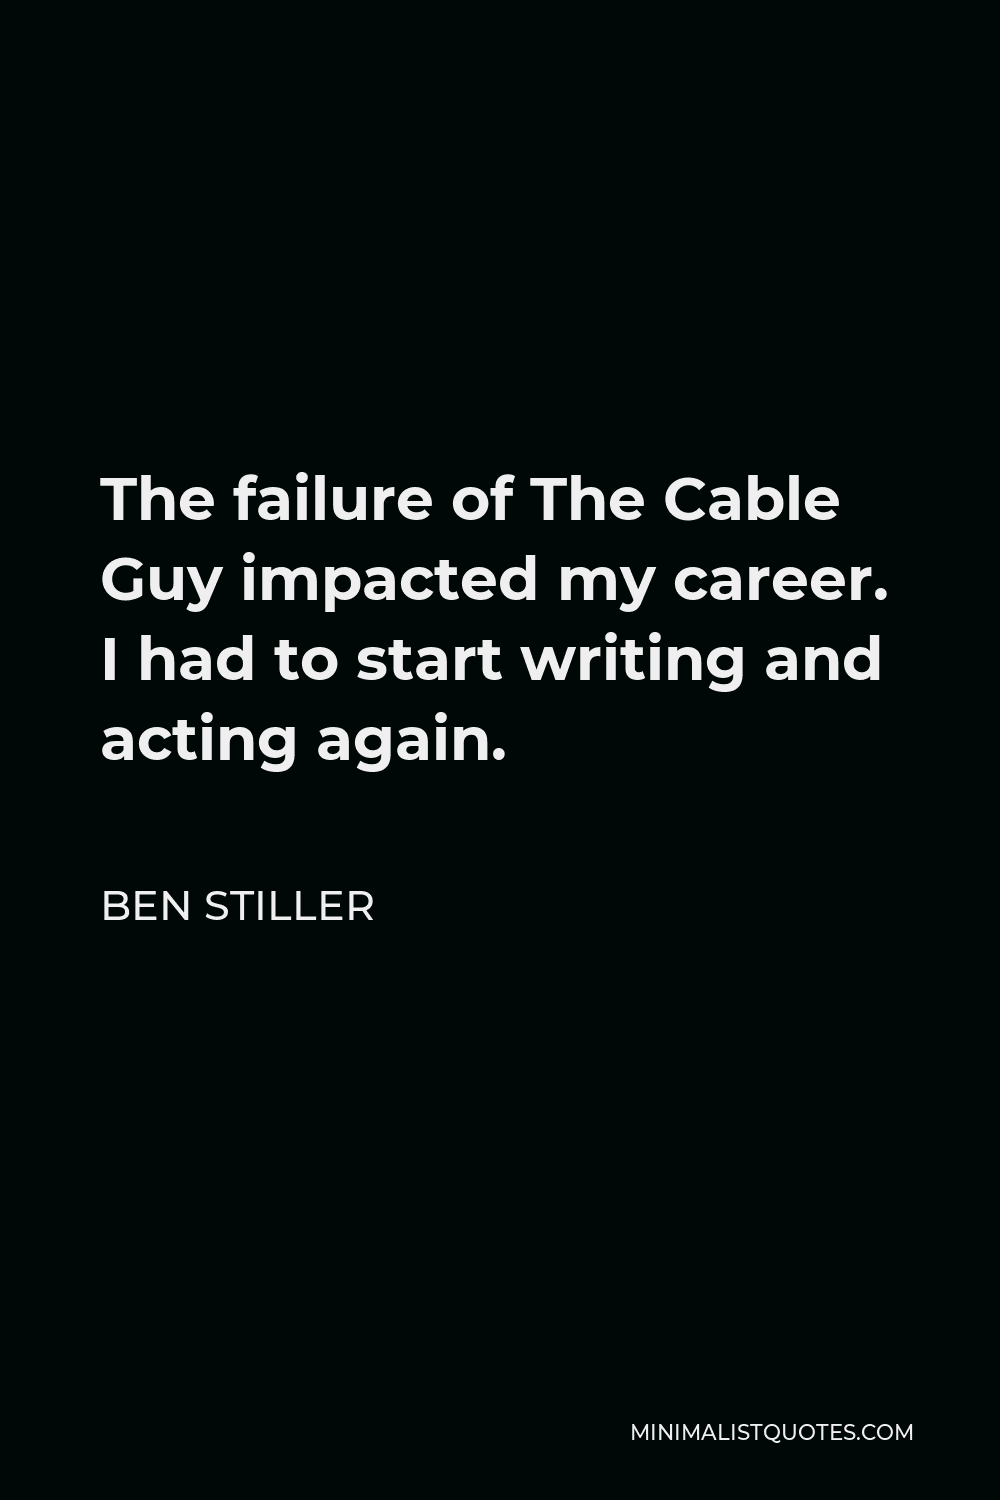 Ben Stiller Quote - The failure of The Cable Guy impacted my career. I had to start writing and acting again.